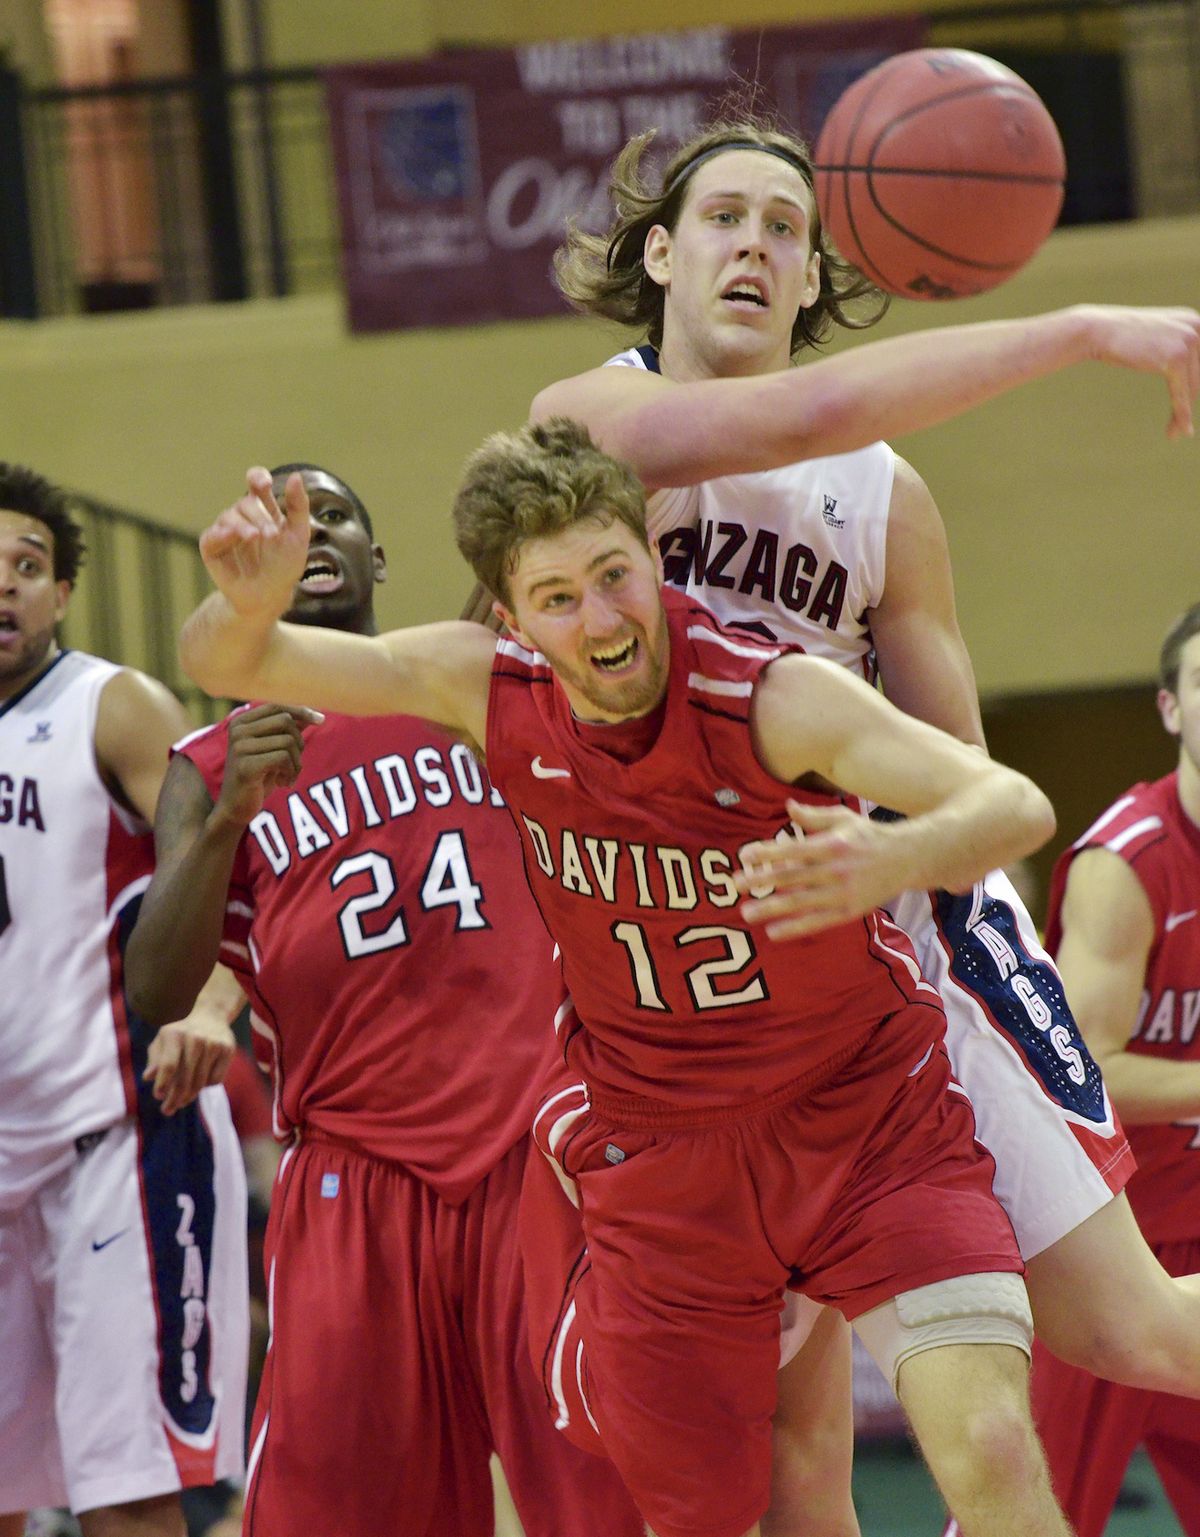 Gonzaga’s Kelly Olynyk goes for a loose ball against Davidson’s Nik Cochran (12) during the first half. (Associated Press)